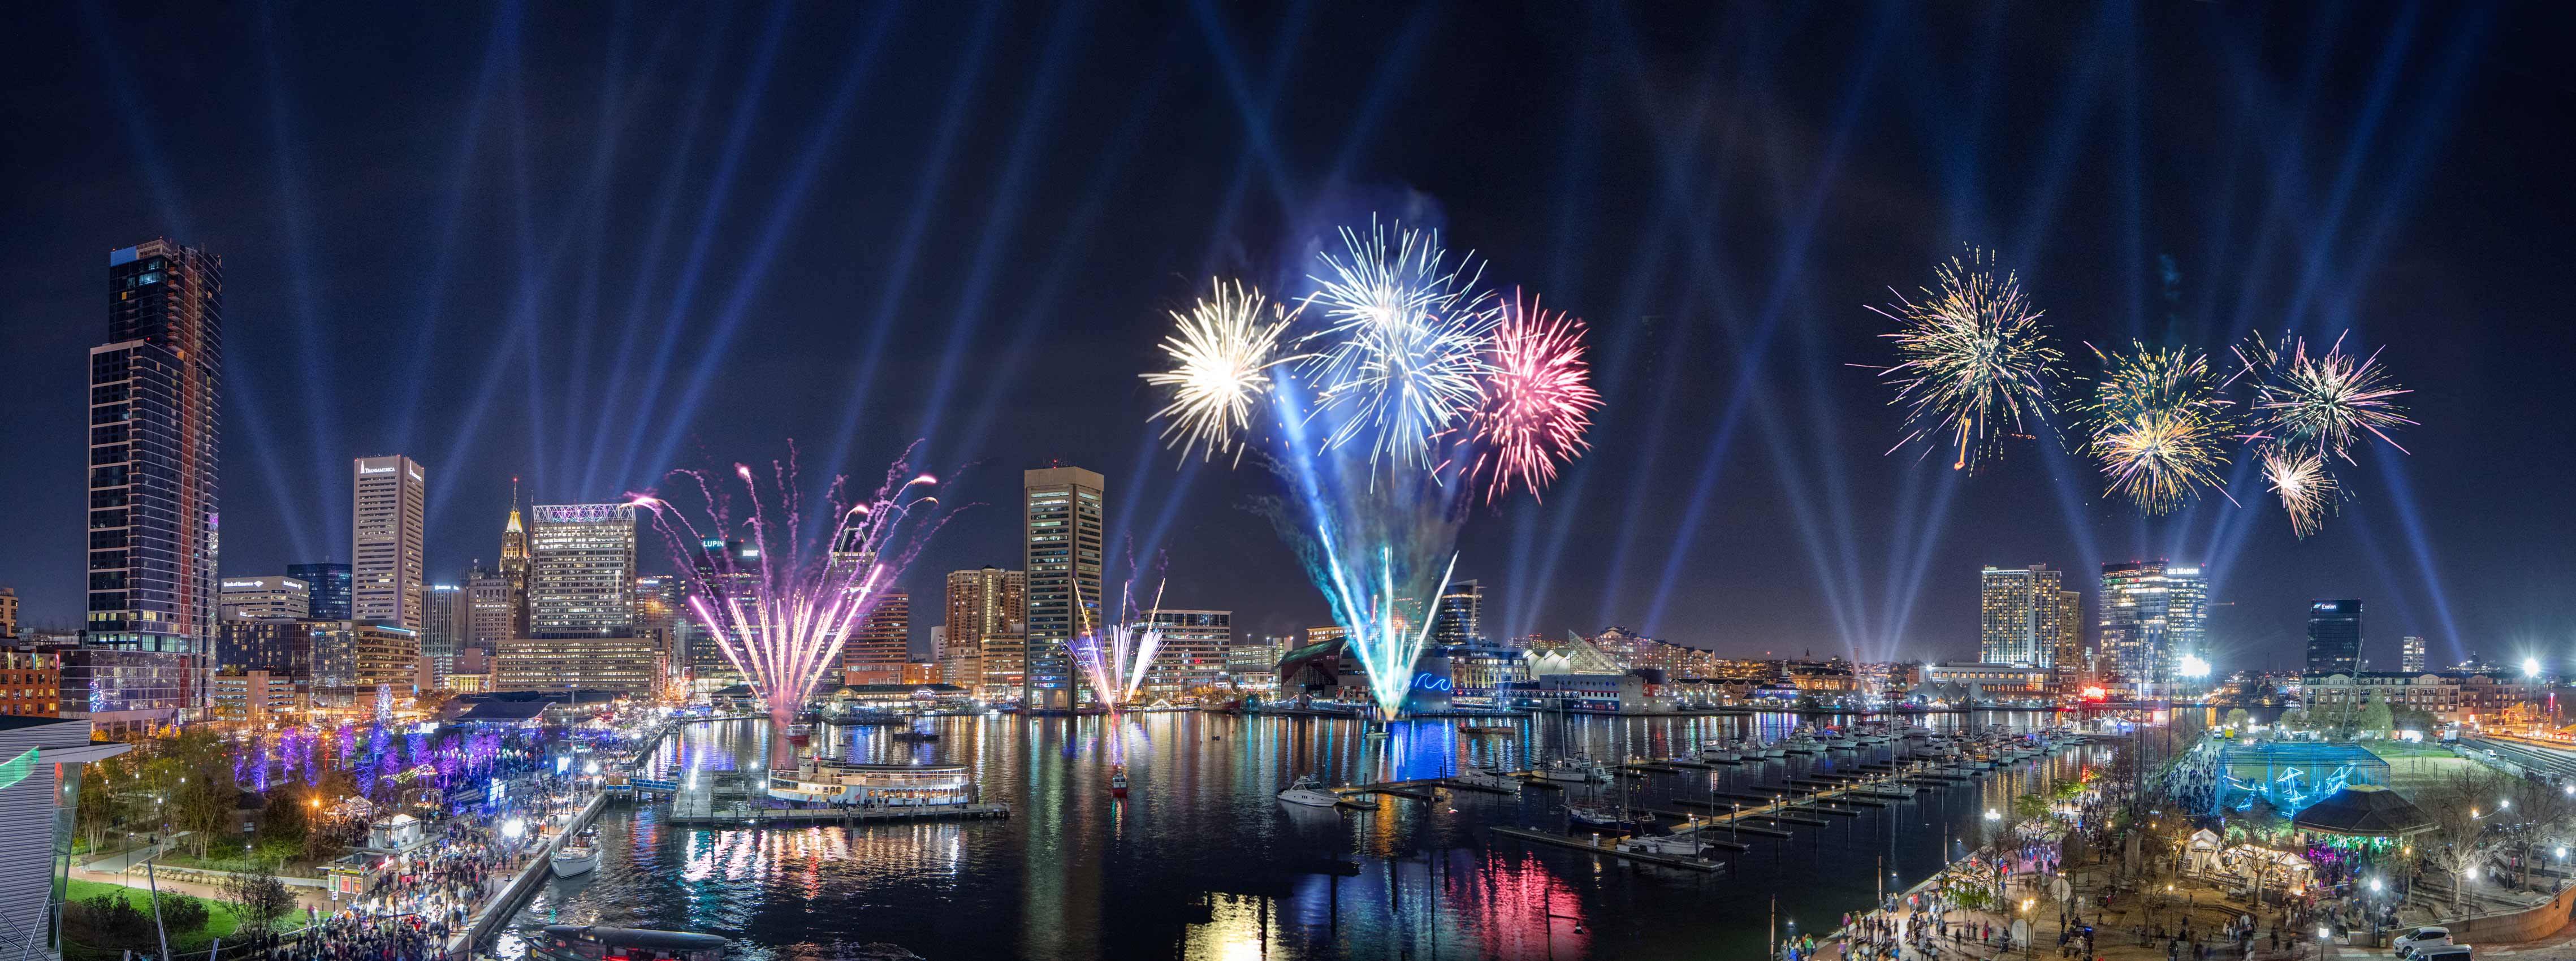 Light City Baltimore with Lights and Fireworks